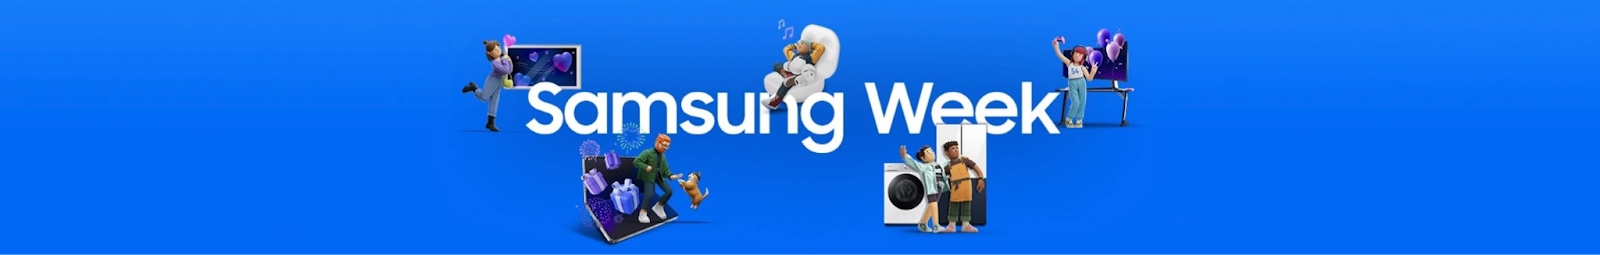 Samsung's channel banner: a clean blue background with a some artwork and a text advertising their upcoming event, Samsung Week.